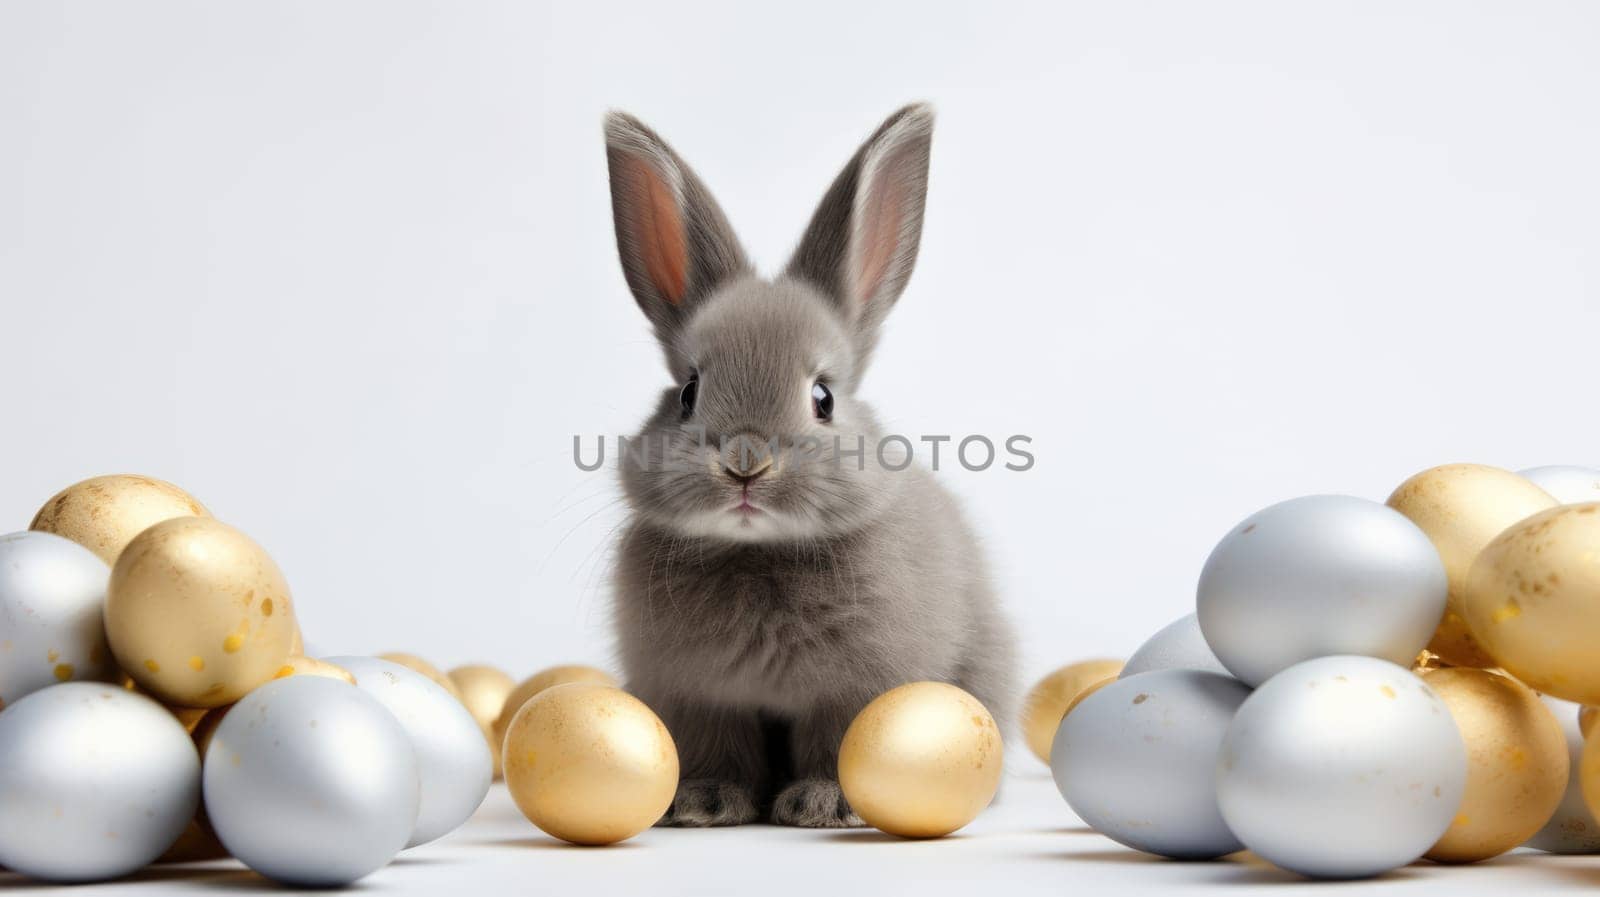 A charming small gray rabbit surrounded by shiny gold and silver Easter eggs on a bright white background. The rabbit is gazing directly at the camera, adding a touch of whimsy to the festive scene.